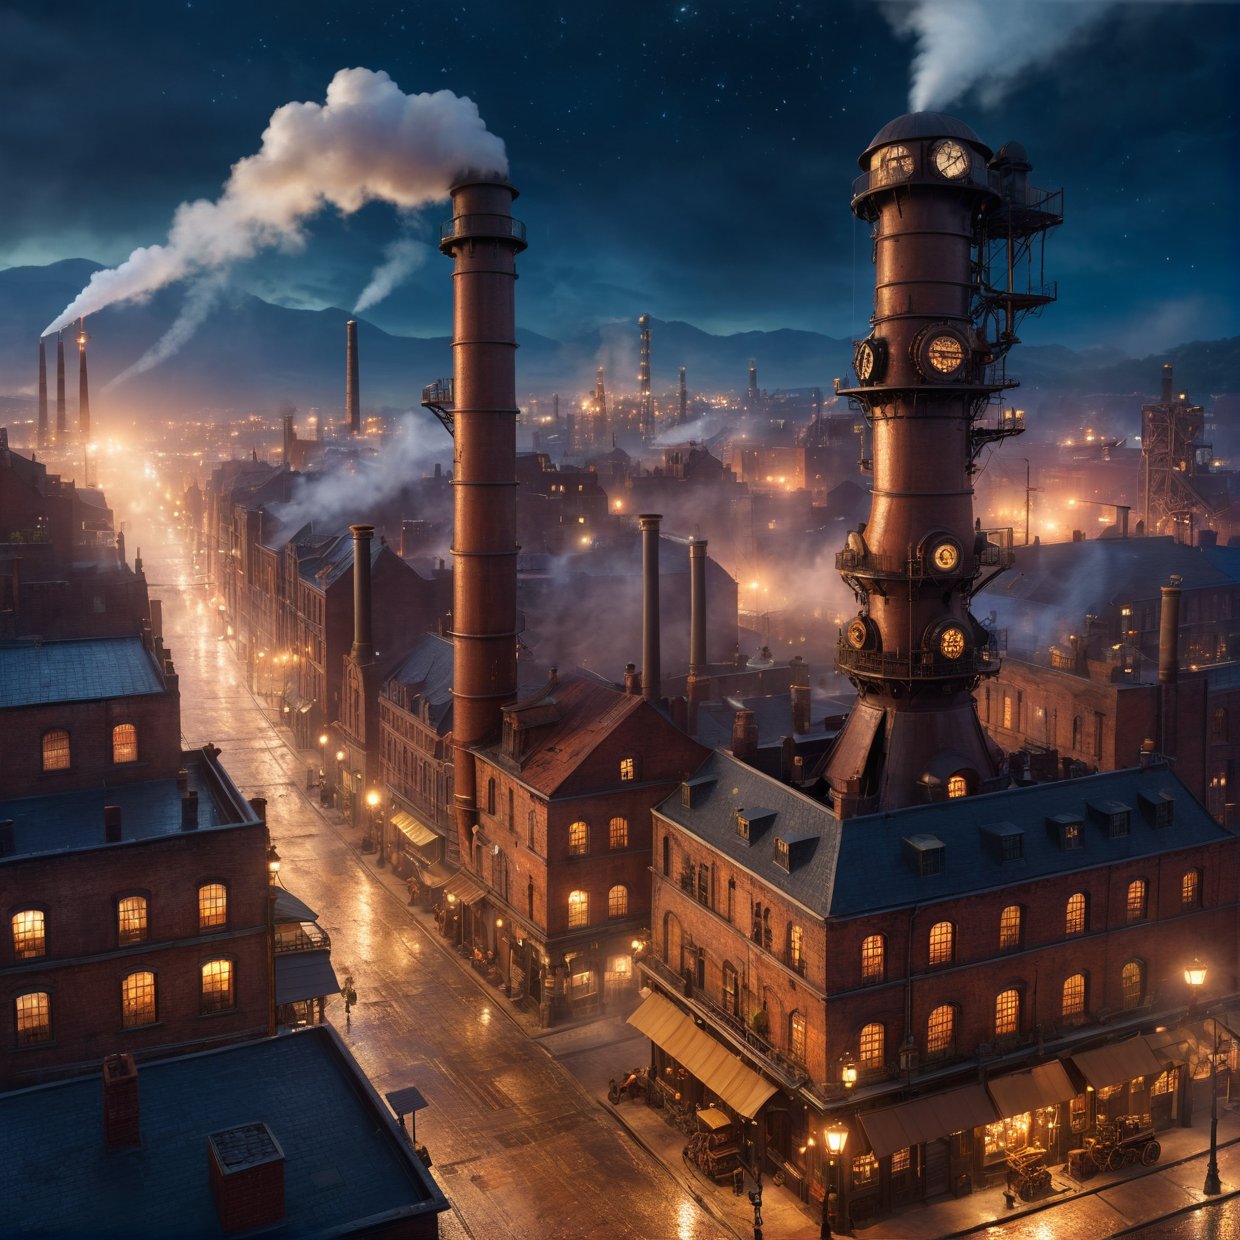 industrial city, surround by wall, steampunk. there is inn, residental area, ((airships)) in the sky, city gate, rusty and heavy, smoke, chimney, factories, gears, machinery, tall buildings, towers, steam power, steam pipes, streetlights, (bird-eye view), (night time, starry sky), (hard rain), (crossroad), (cinematic lighting, super detail, bloom)